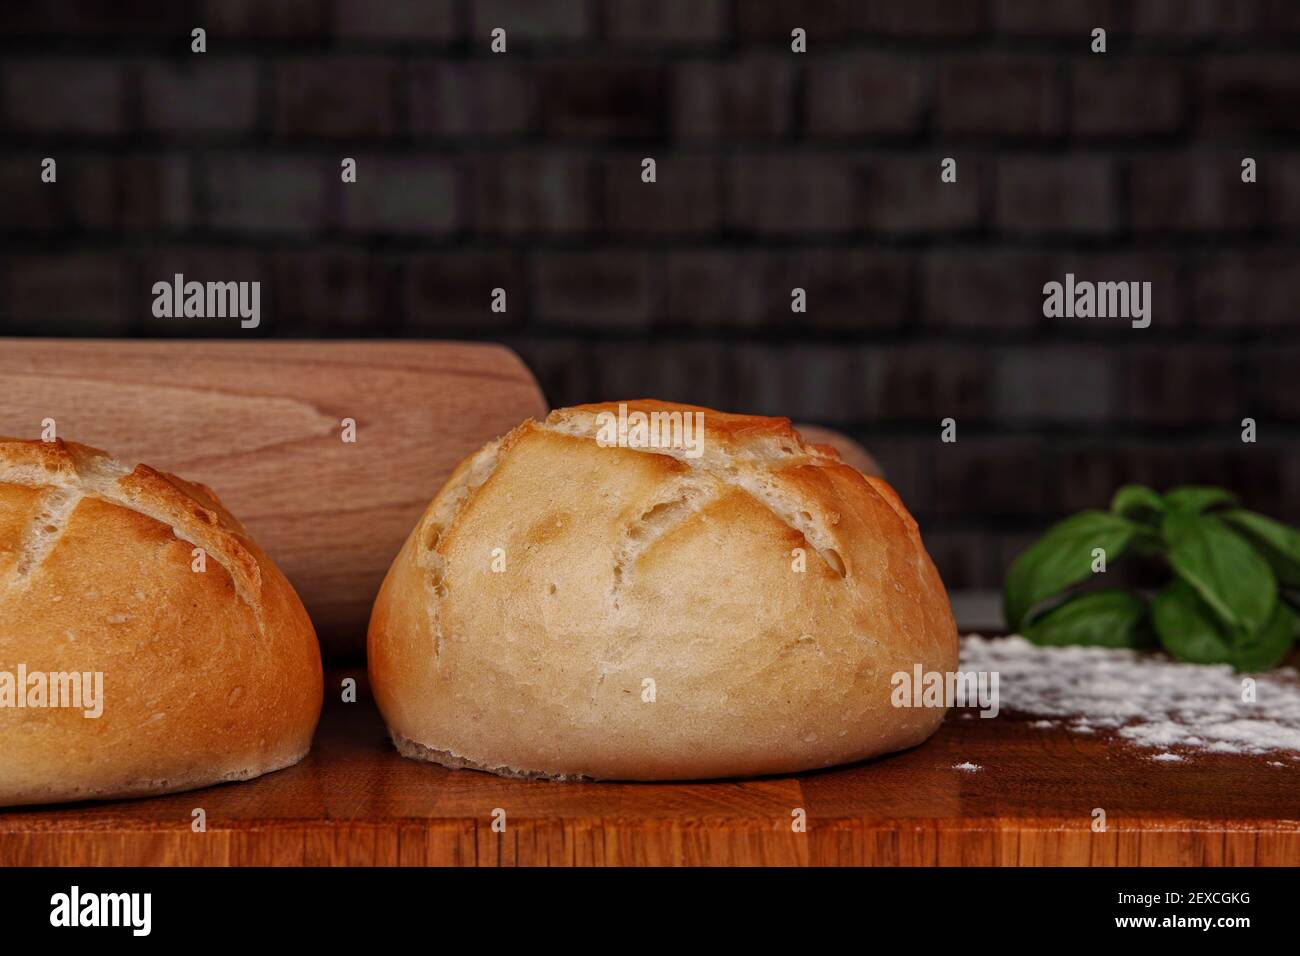 Fresh buns on a wooden board dusted with flour and a rolling pin in the background Stock Photo